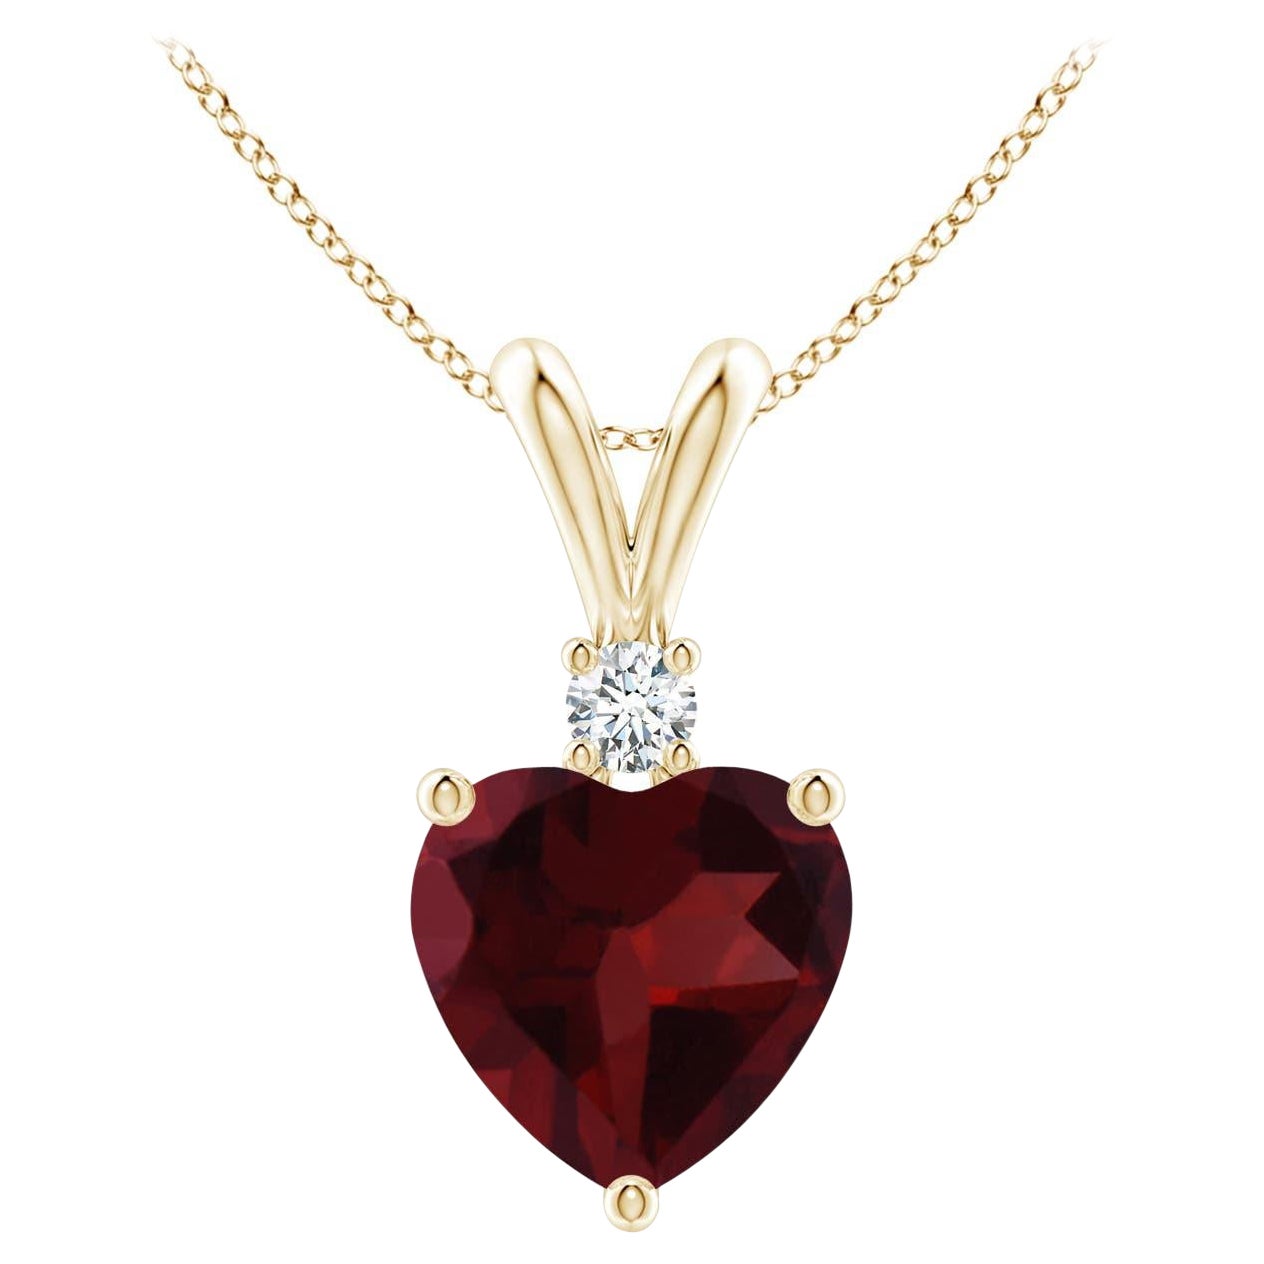 Natural Heart-Shaped 1.4ct Garnet Pendant with Diamond in 14ct Yellow Gold